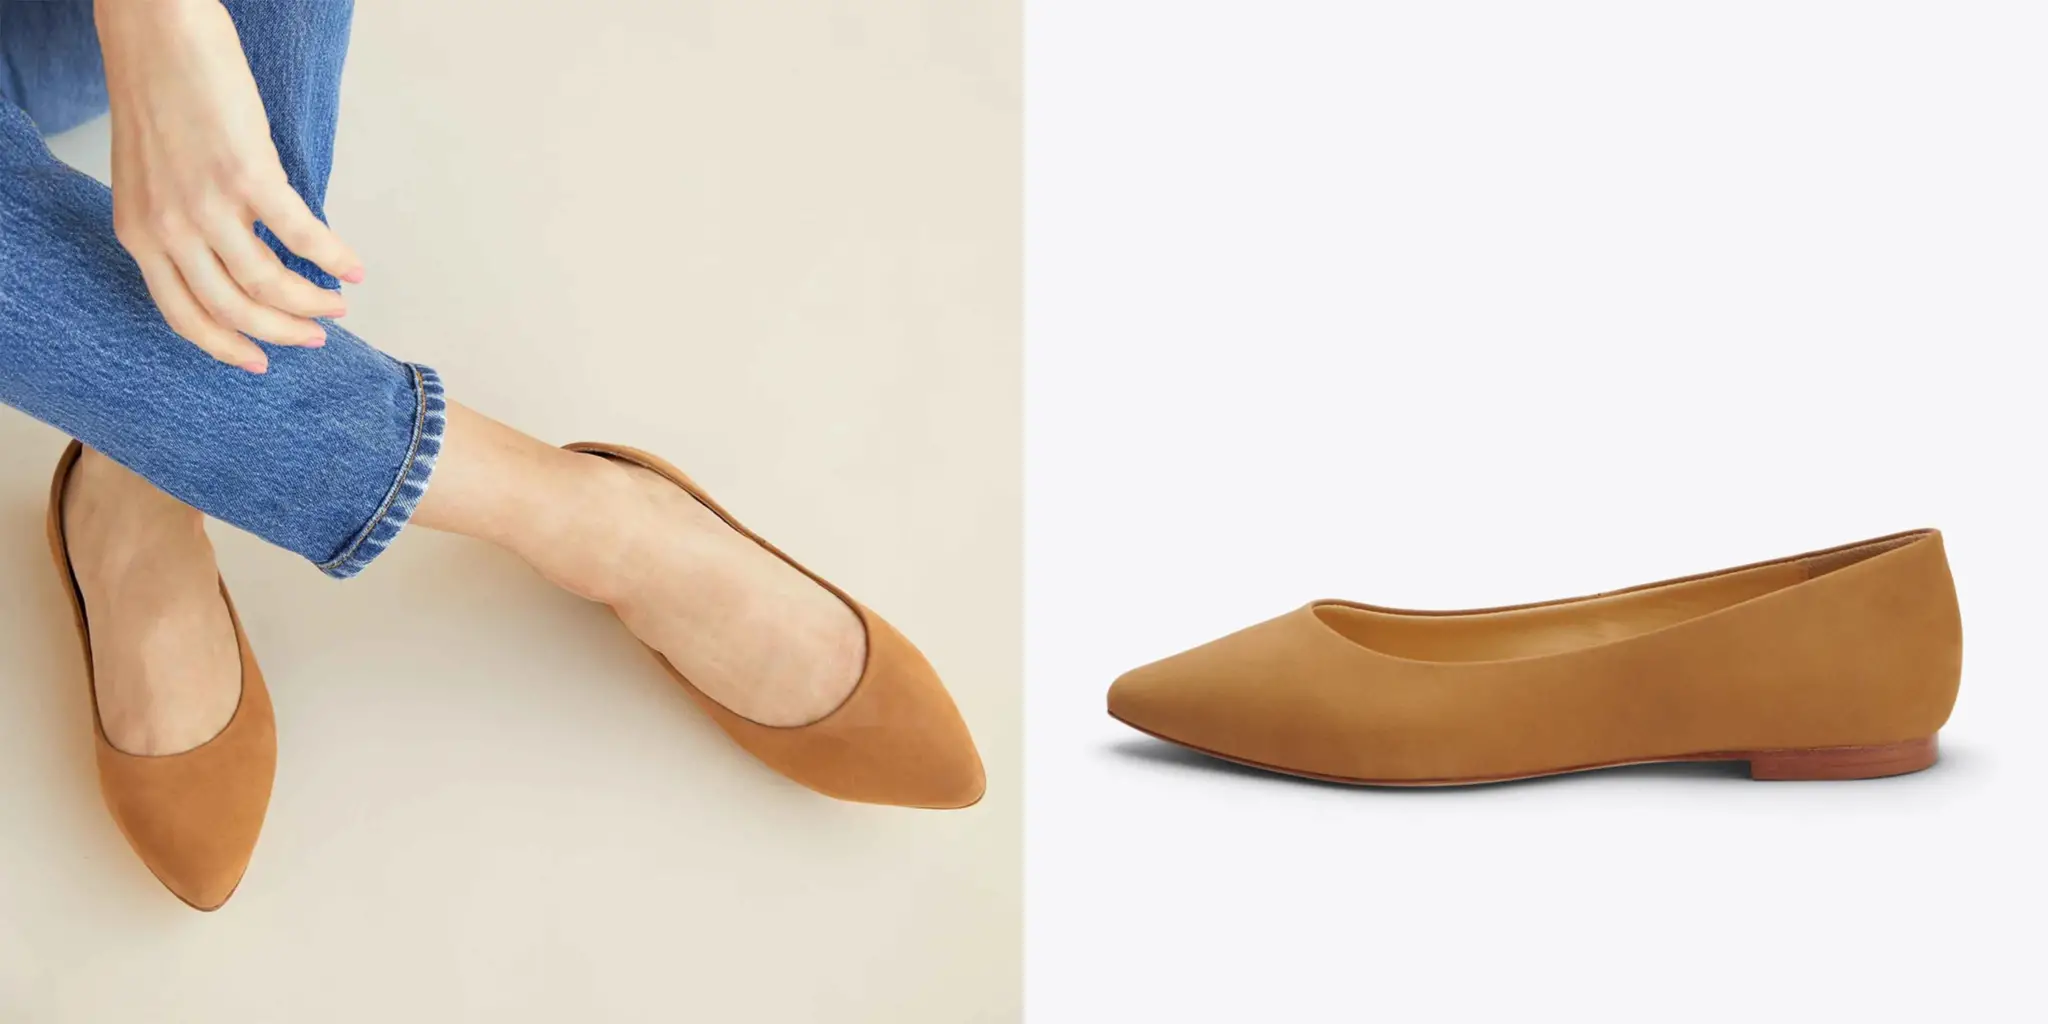 Slippers That Look Like Shoes: 8 Shoes That Feel Like Slippers